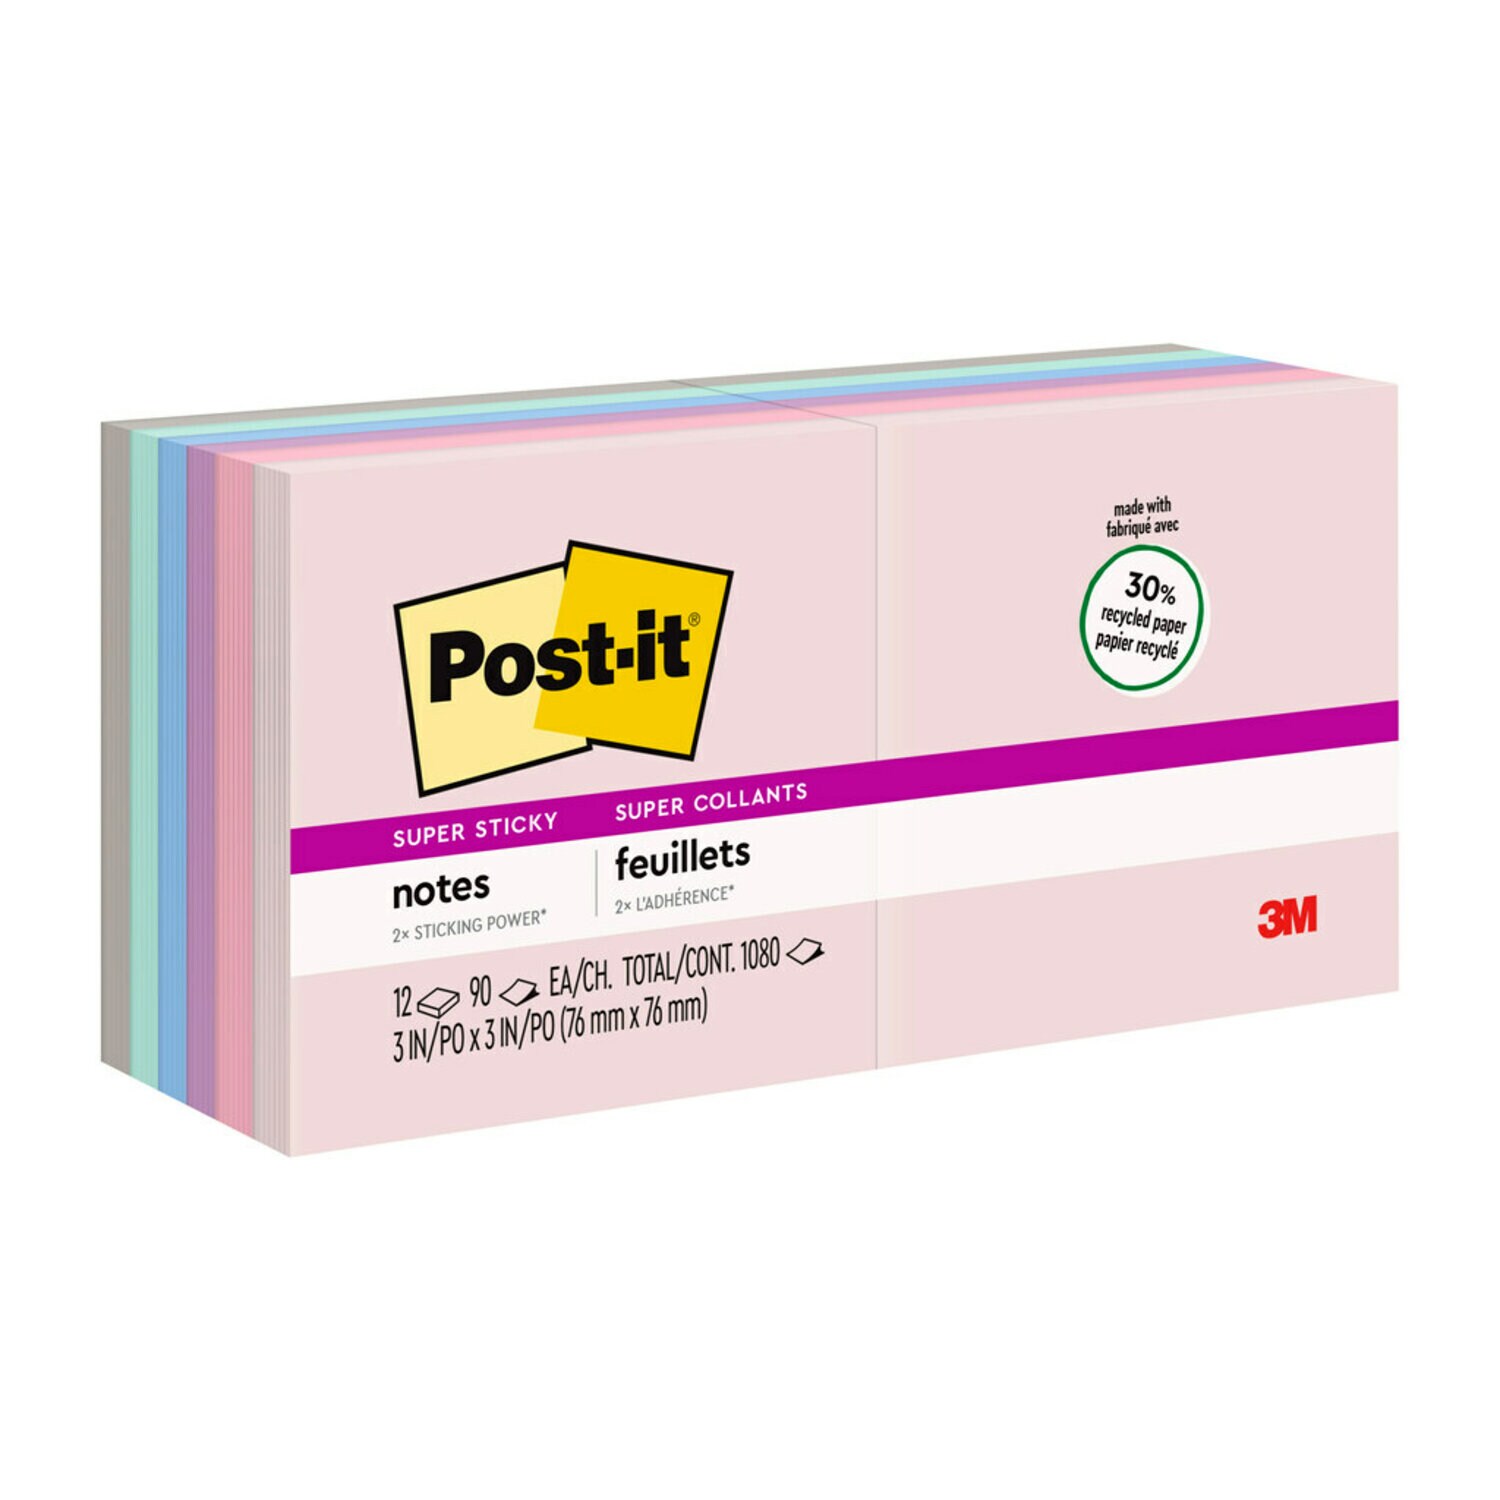 7100061960 - Post-it Super Sticky Recycled Notes 654-12SSNRP, 3 in x 3 in (76 mm x 76 mm), Wanderlust Pastels Collection